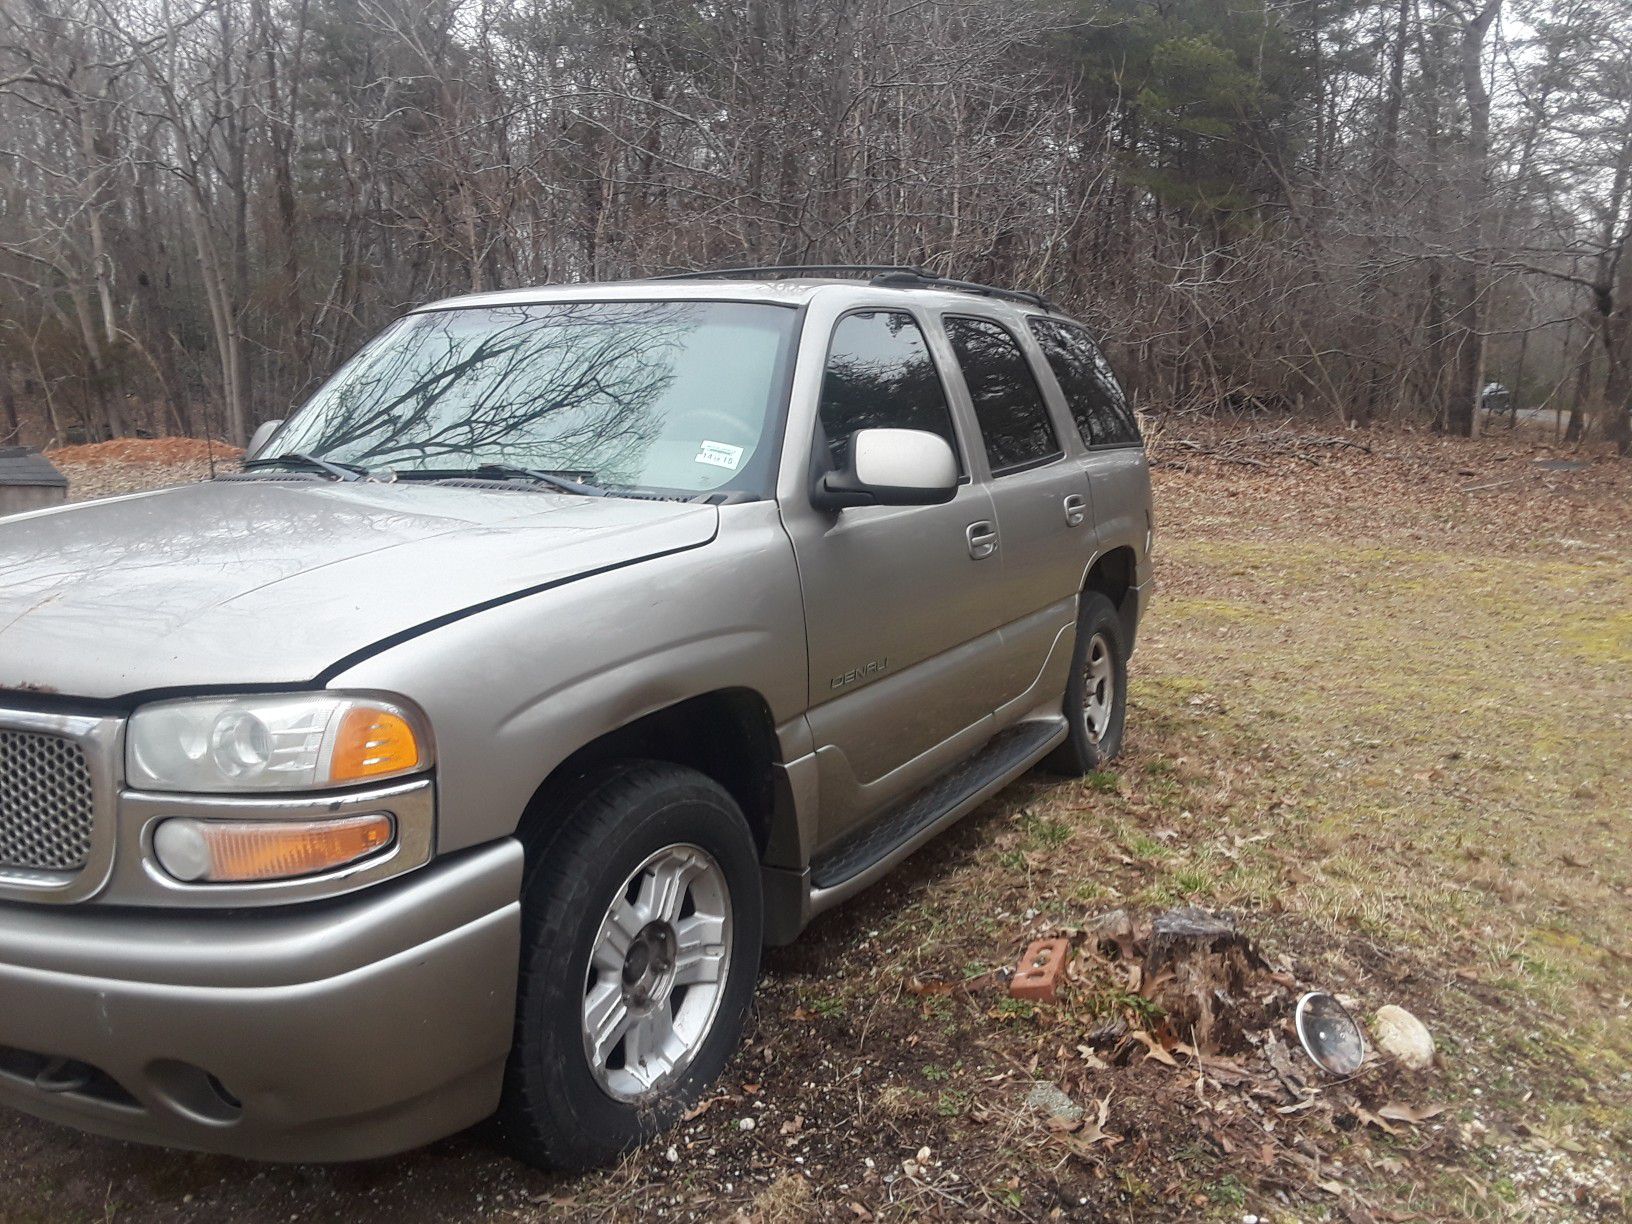 02 Yukon Denali parts truck or could be fixed